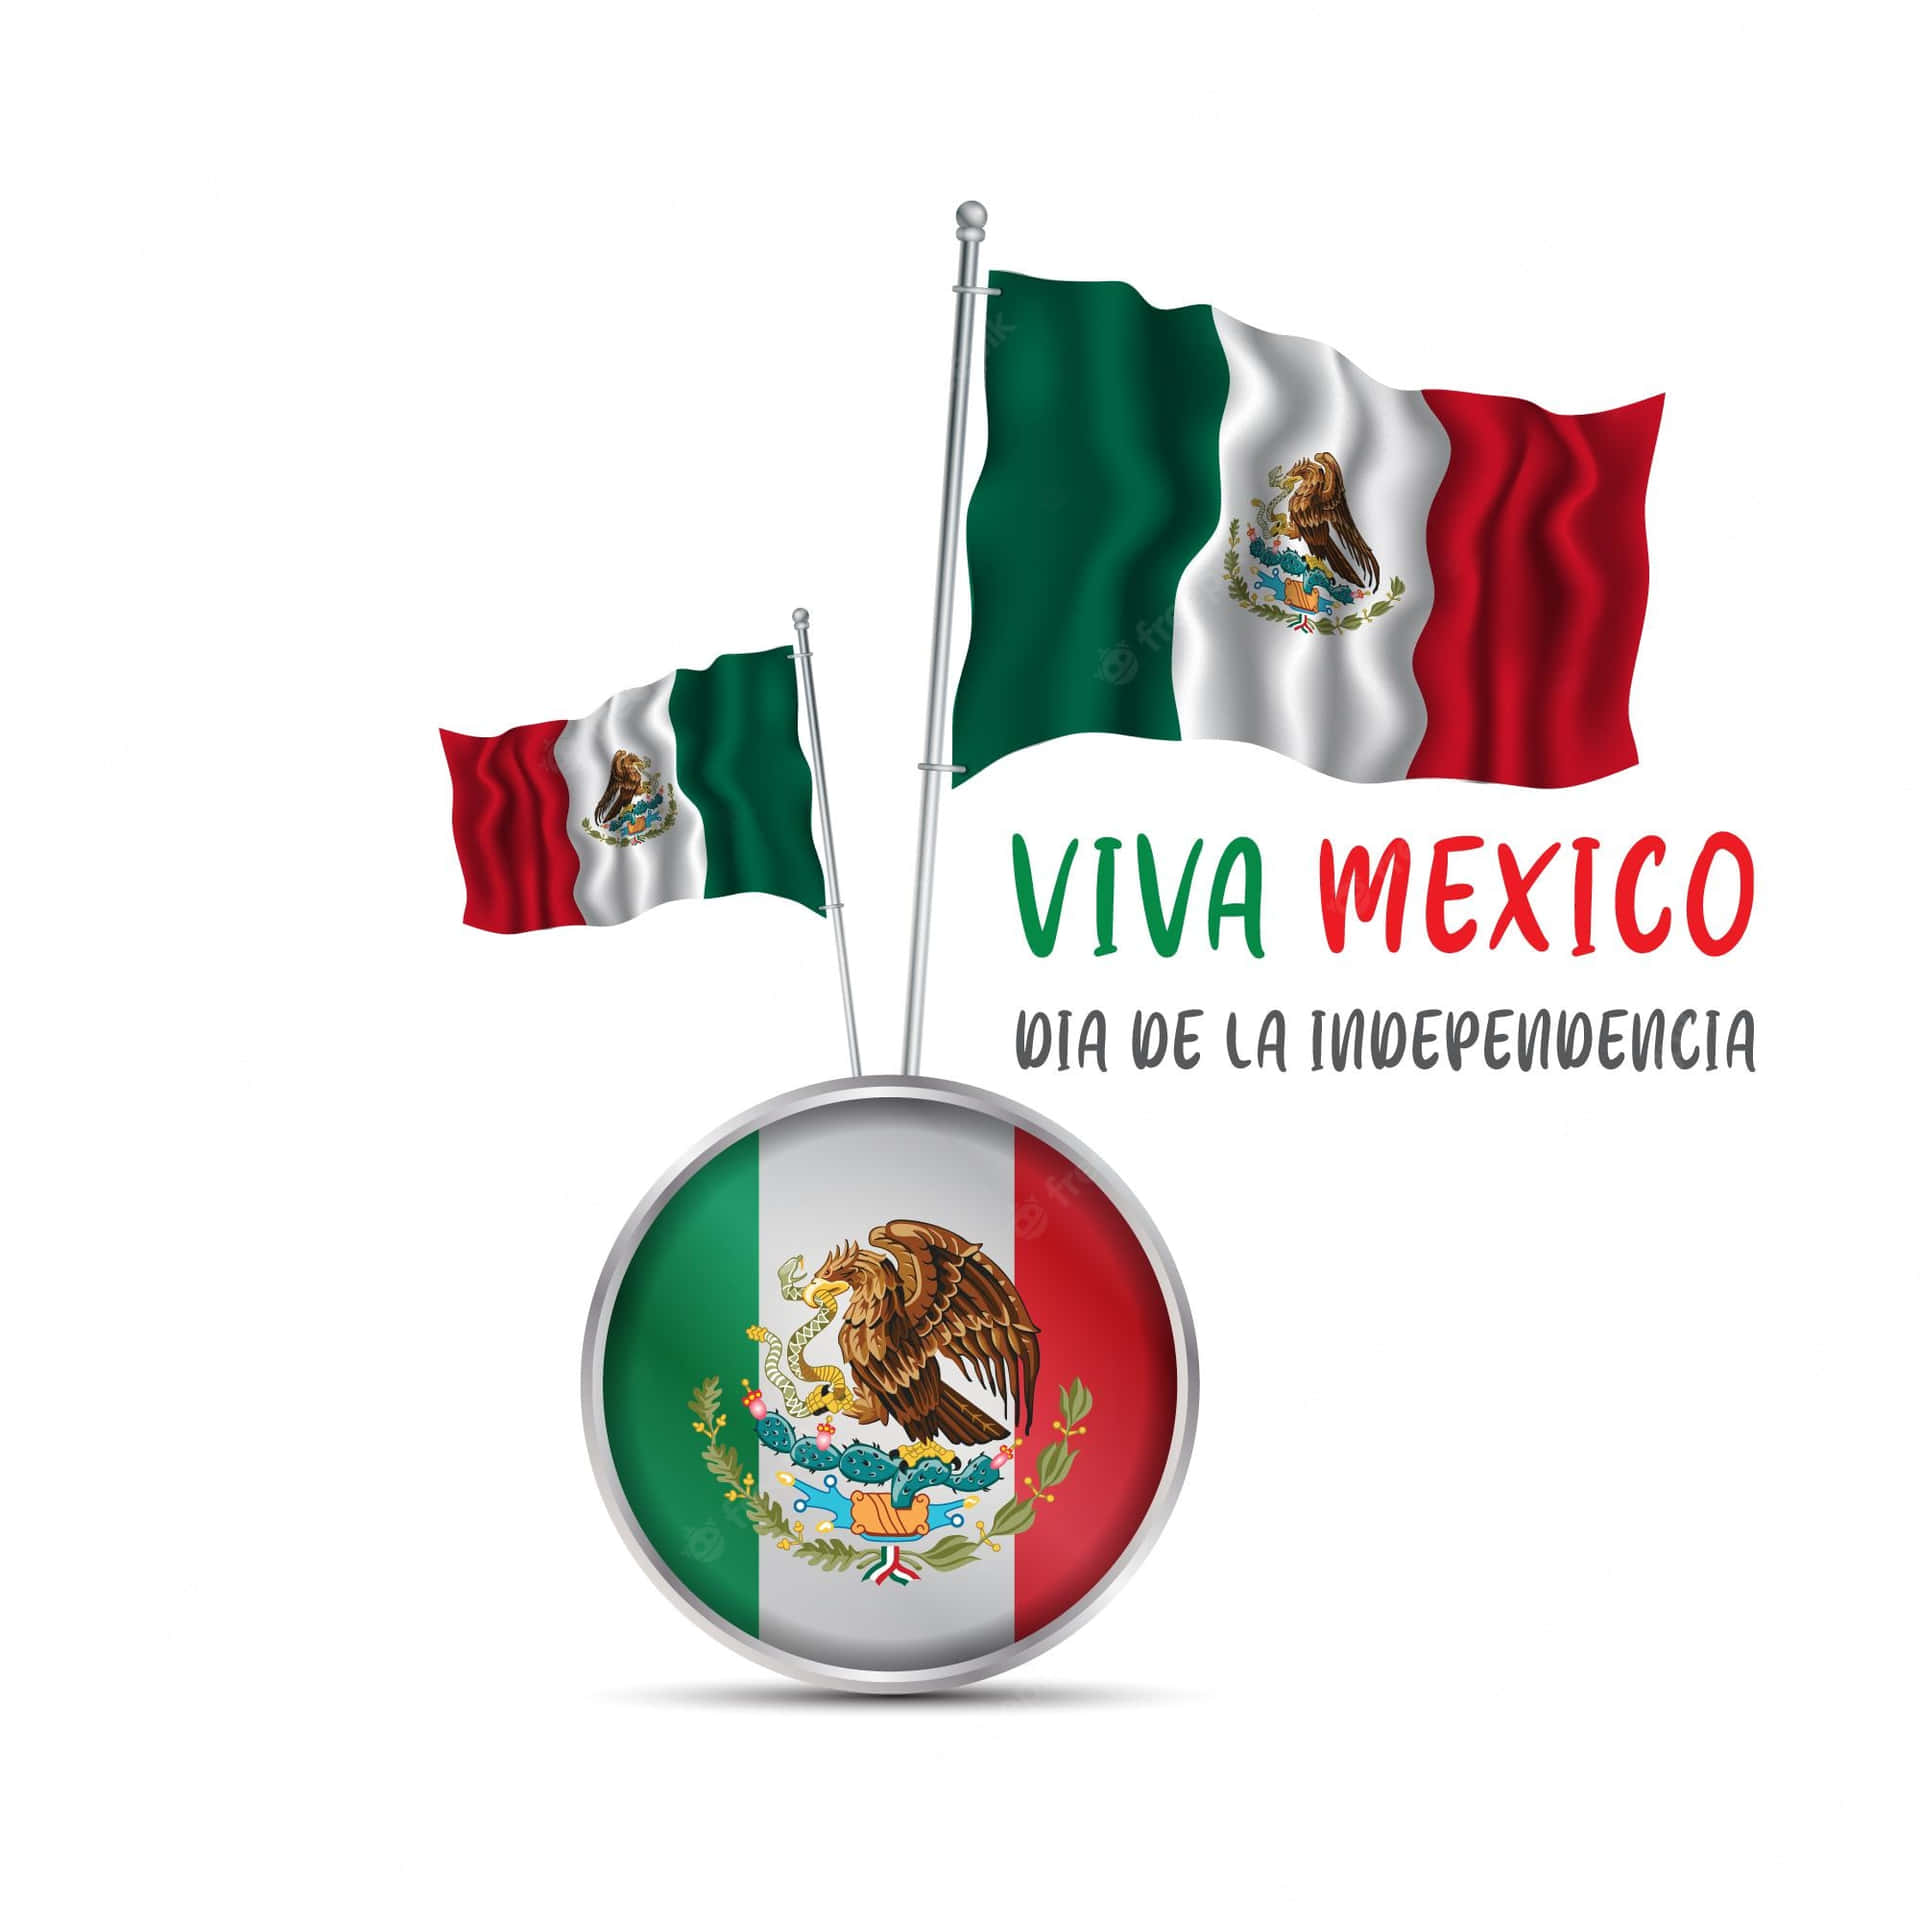 Viva Mexico: A Celebration Of Culture And Traditions